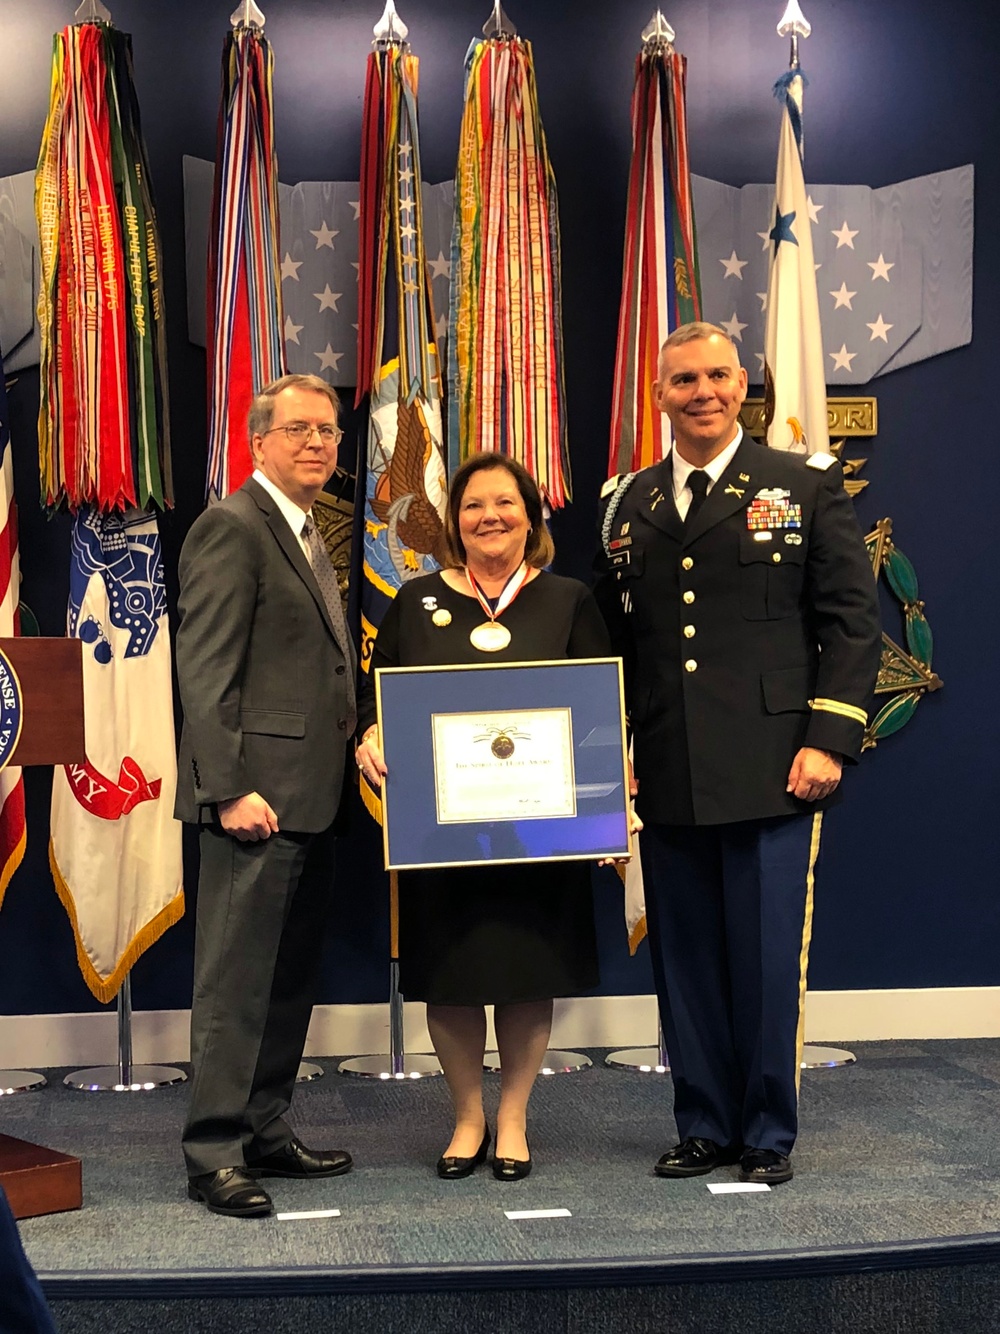 Long-time supporter of Soldiers earns DoD recognition